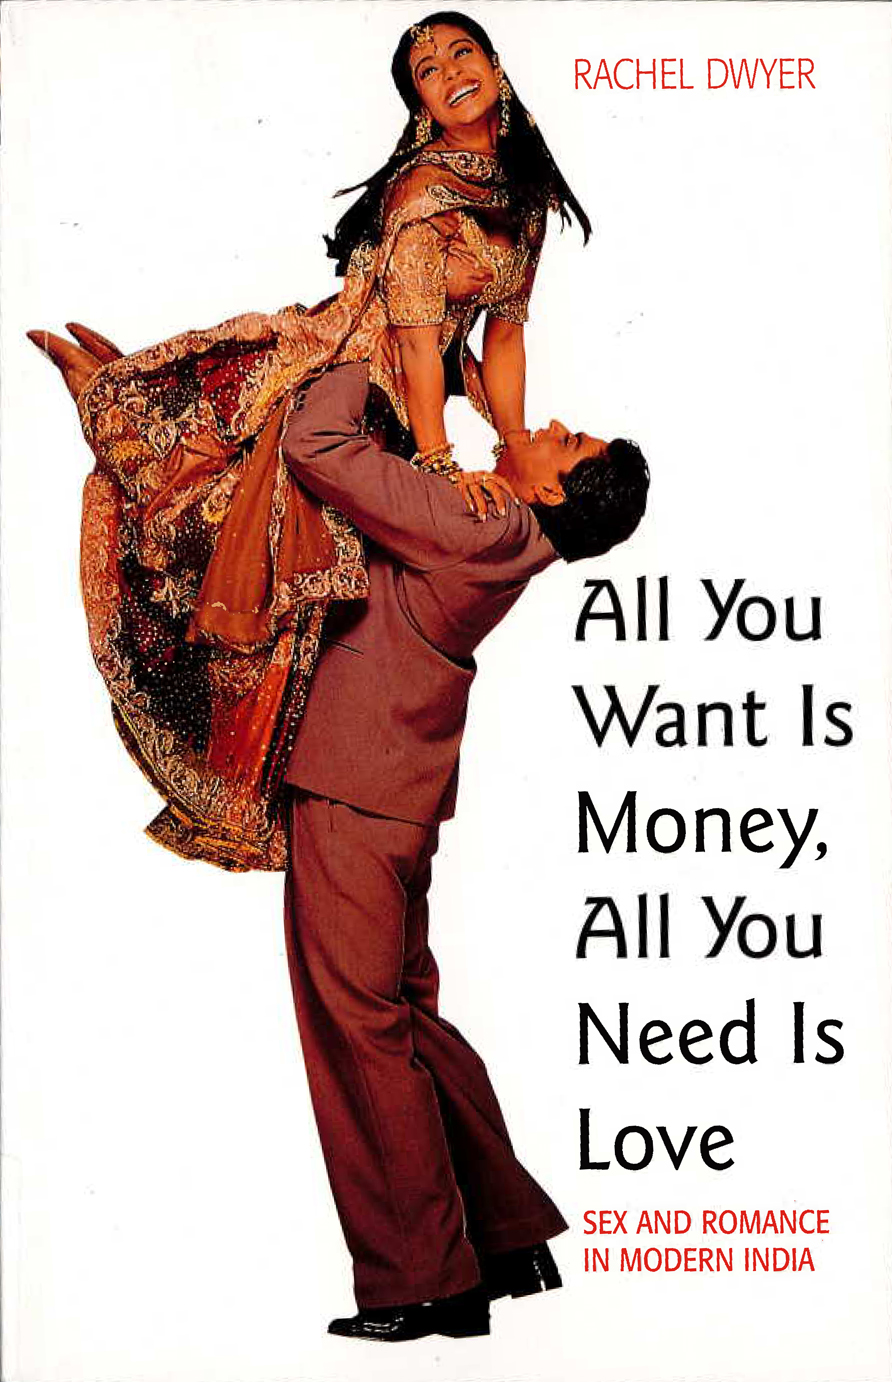 All you want is money, all you need is love